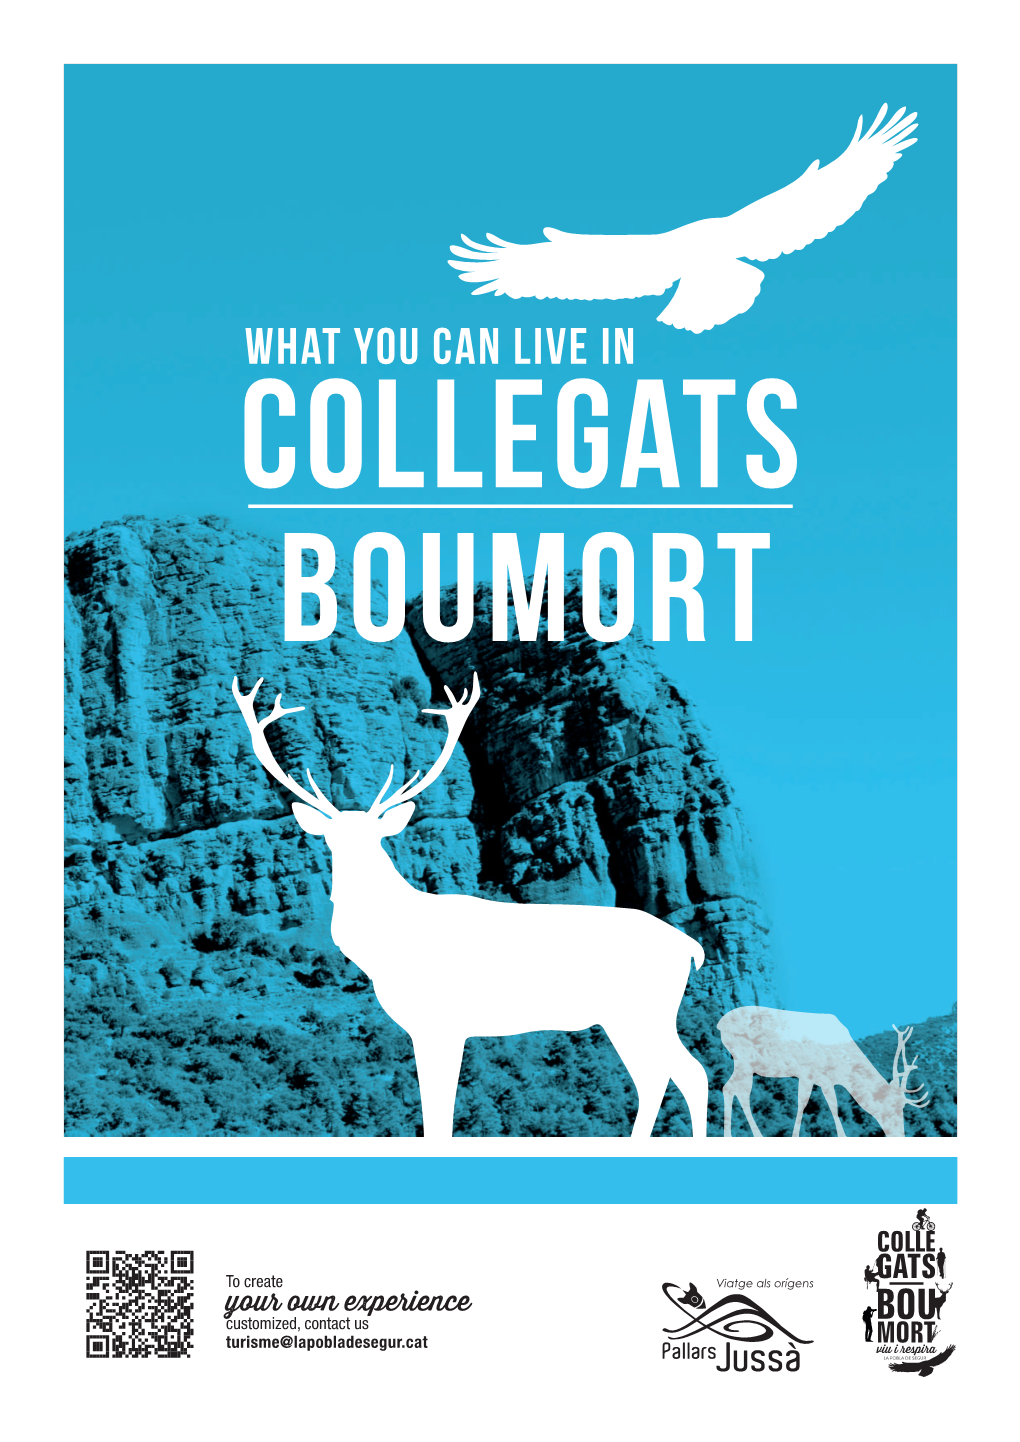 What You Can Live in Collegats Boumort